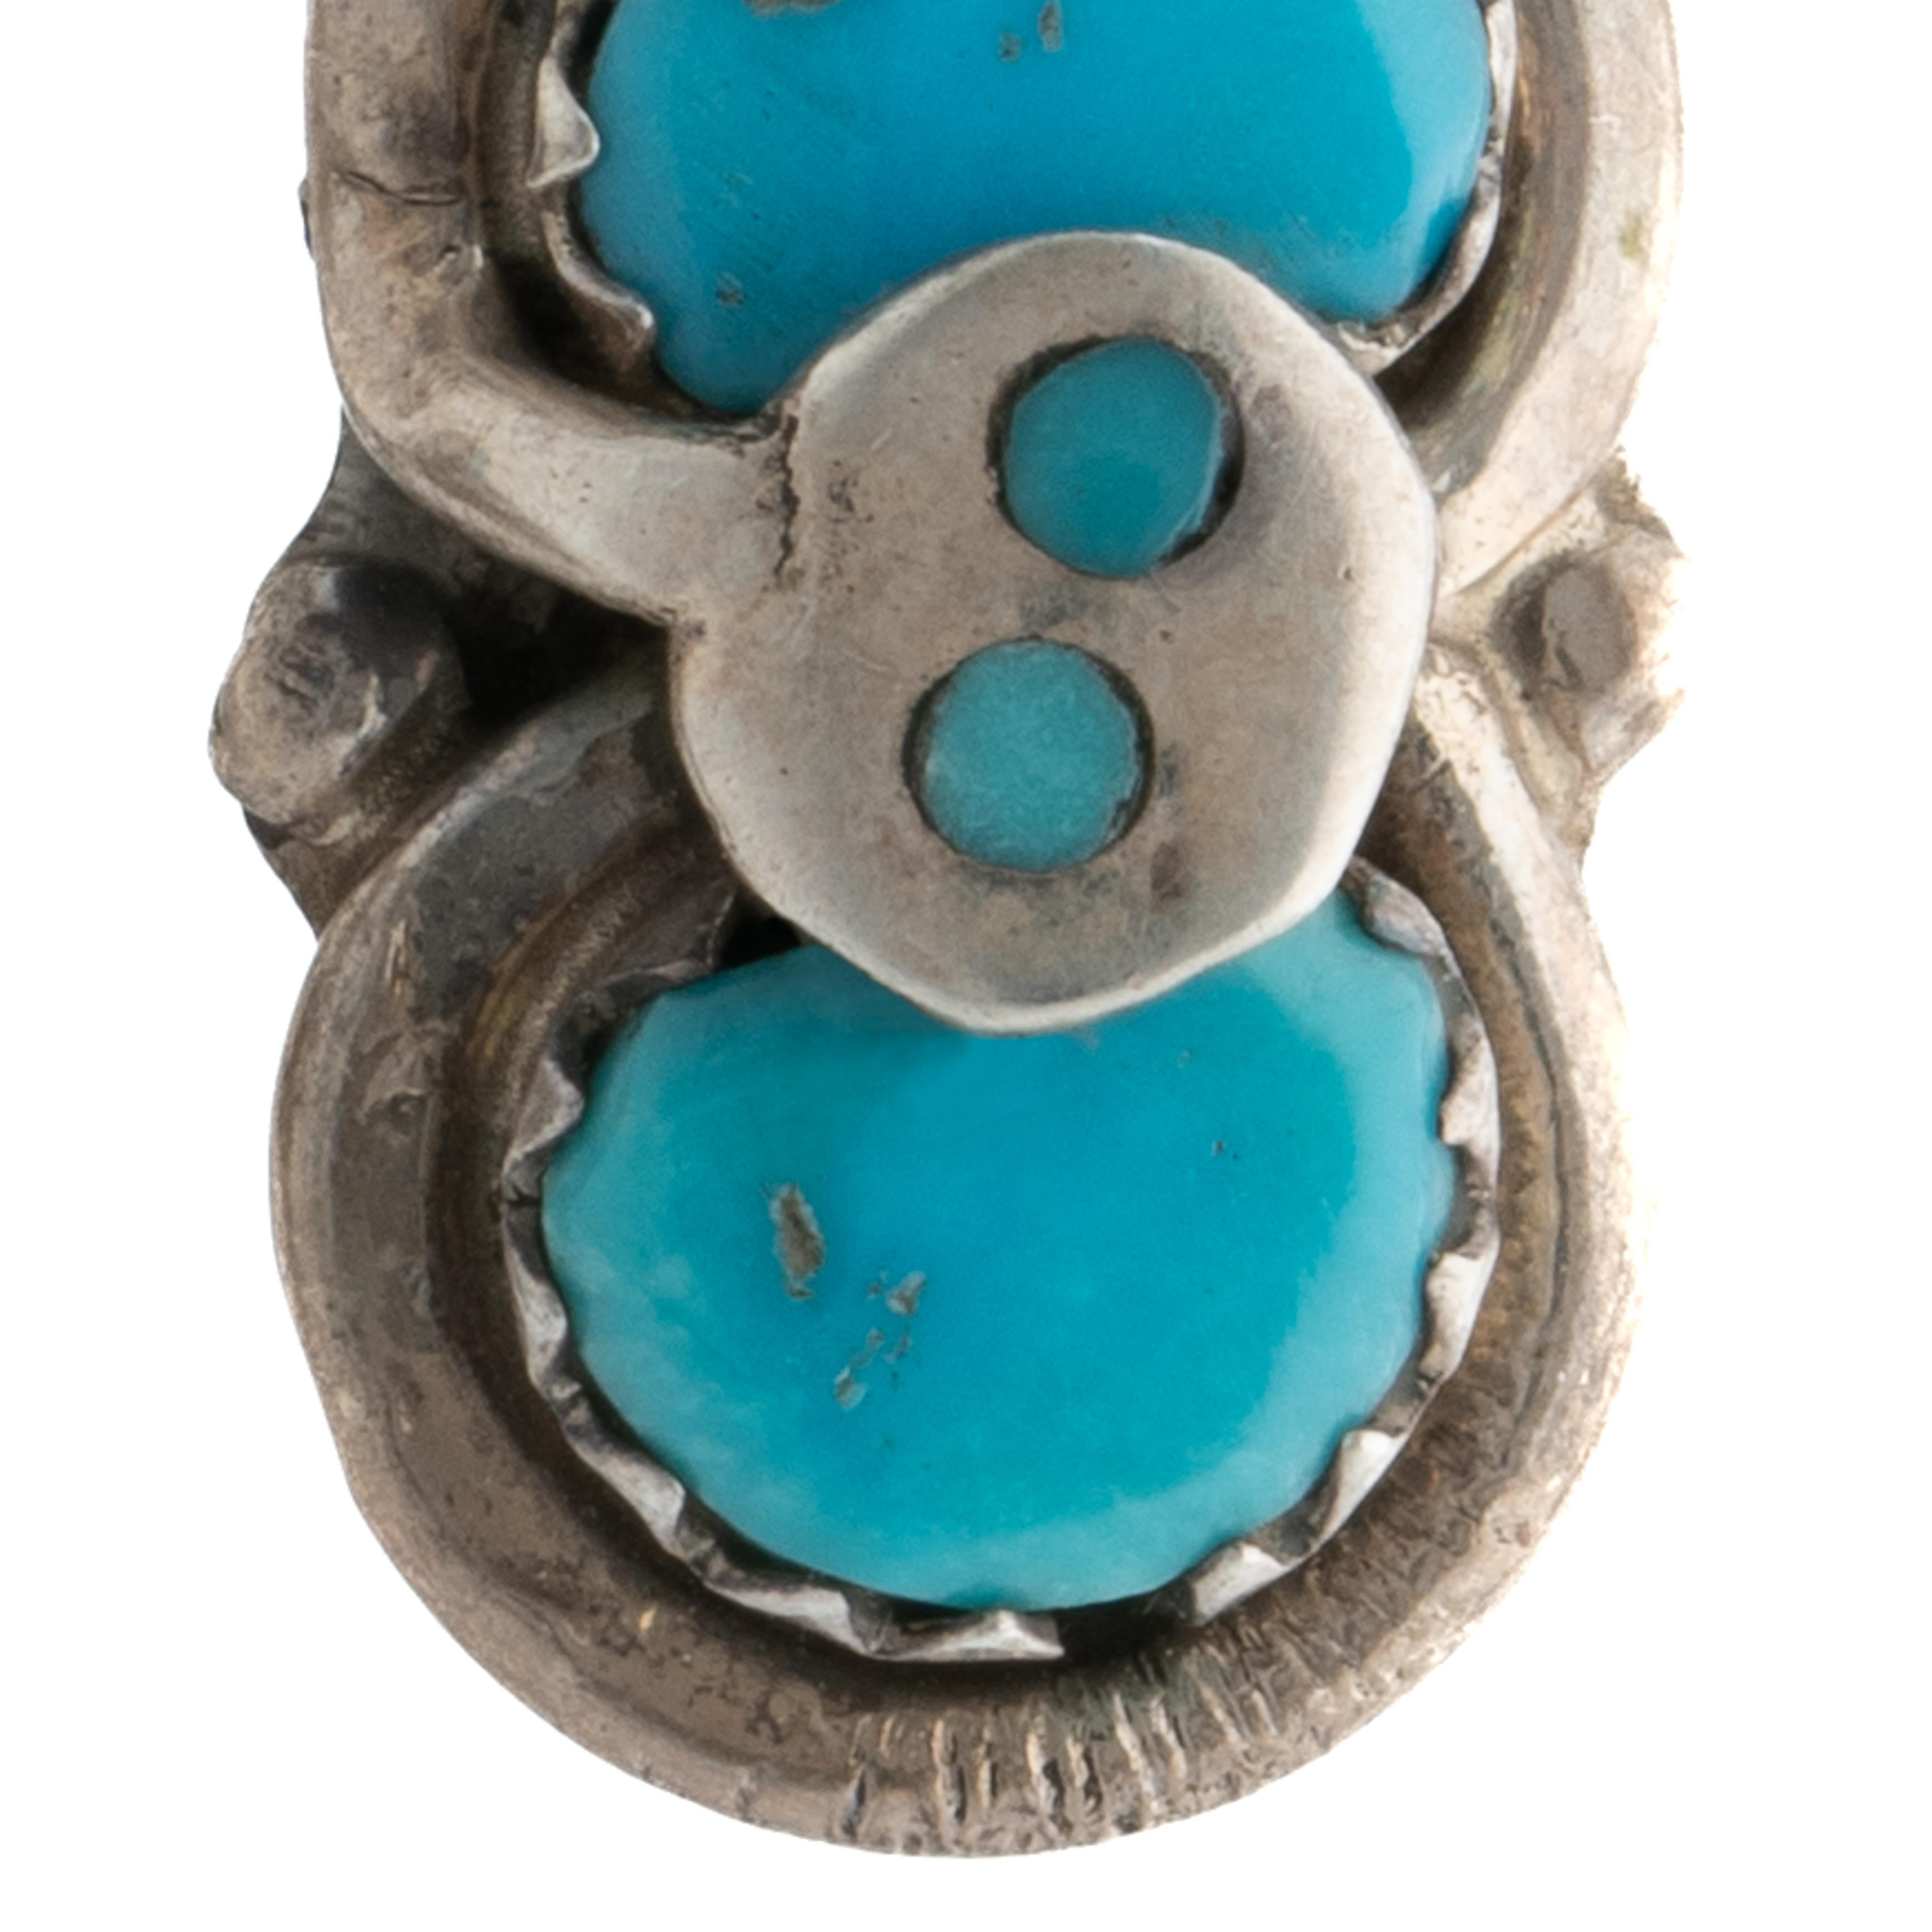 Vintage Zuni Native American Petite Signed Effie Calavaza Turquoise Silver Snake Stud Earrings c.1980s

Length: 0.35